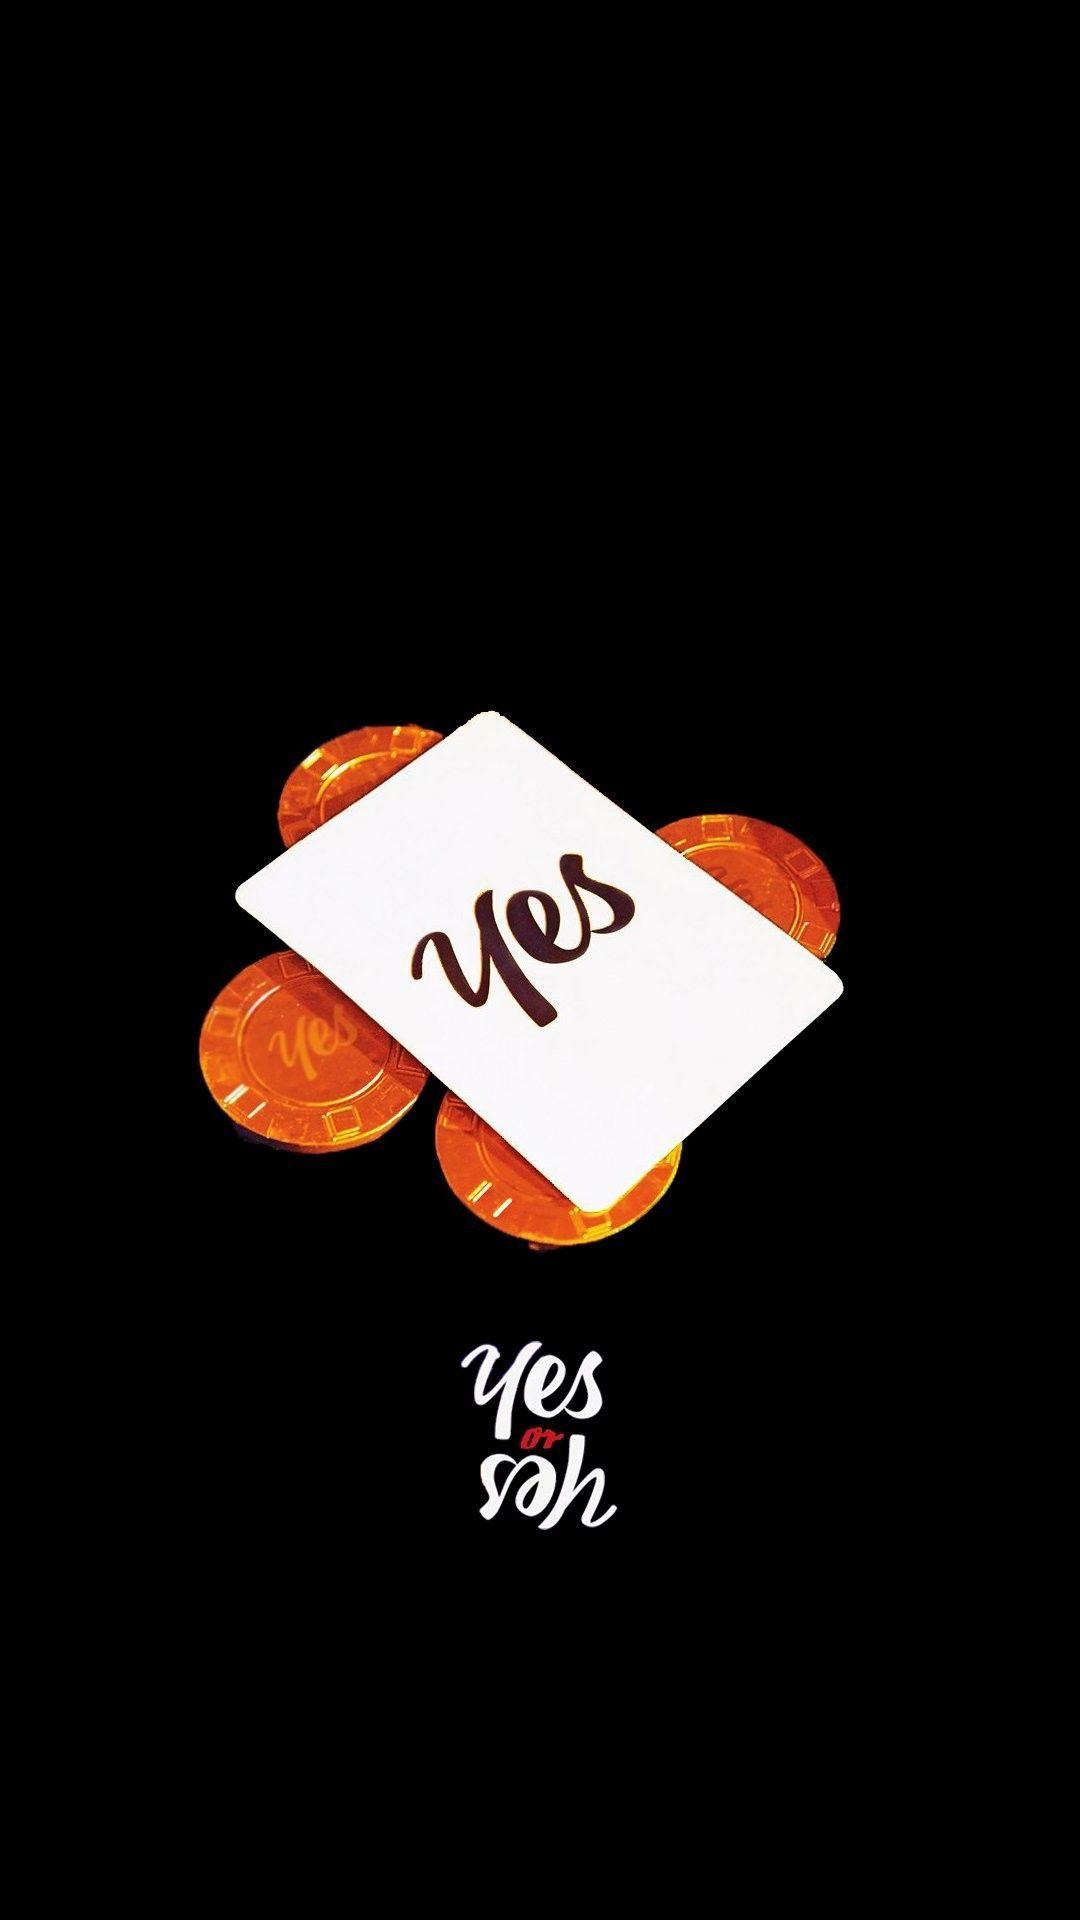 Twice Yes Or Yes Wallpapers Wallpaper Cave